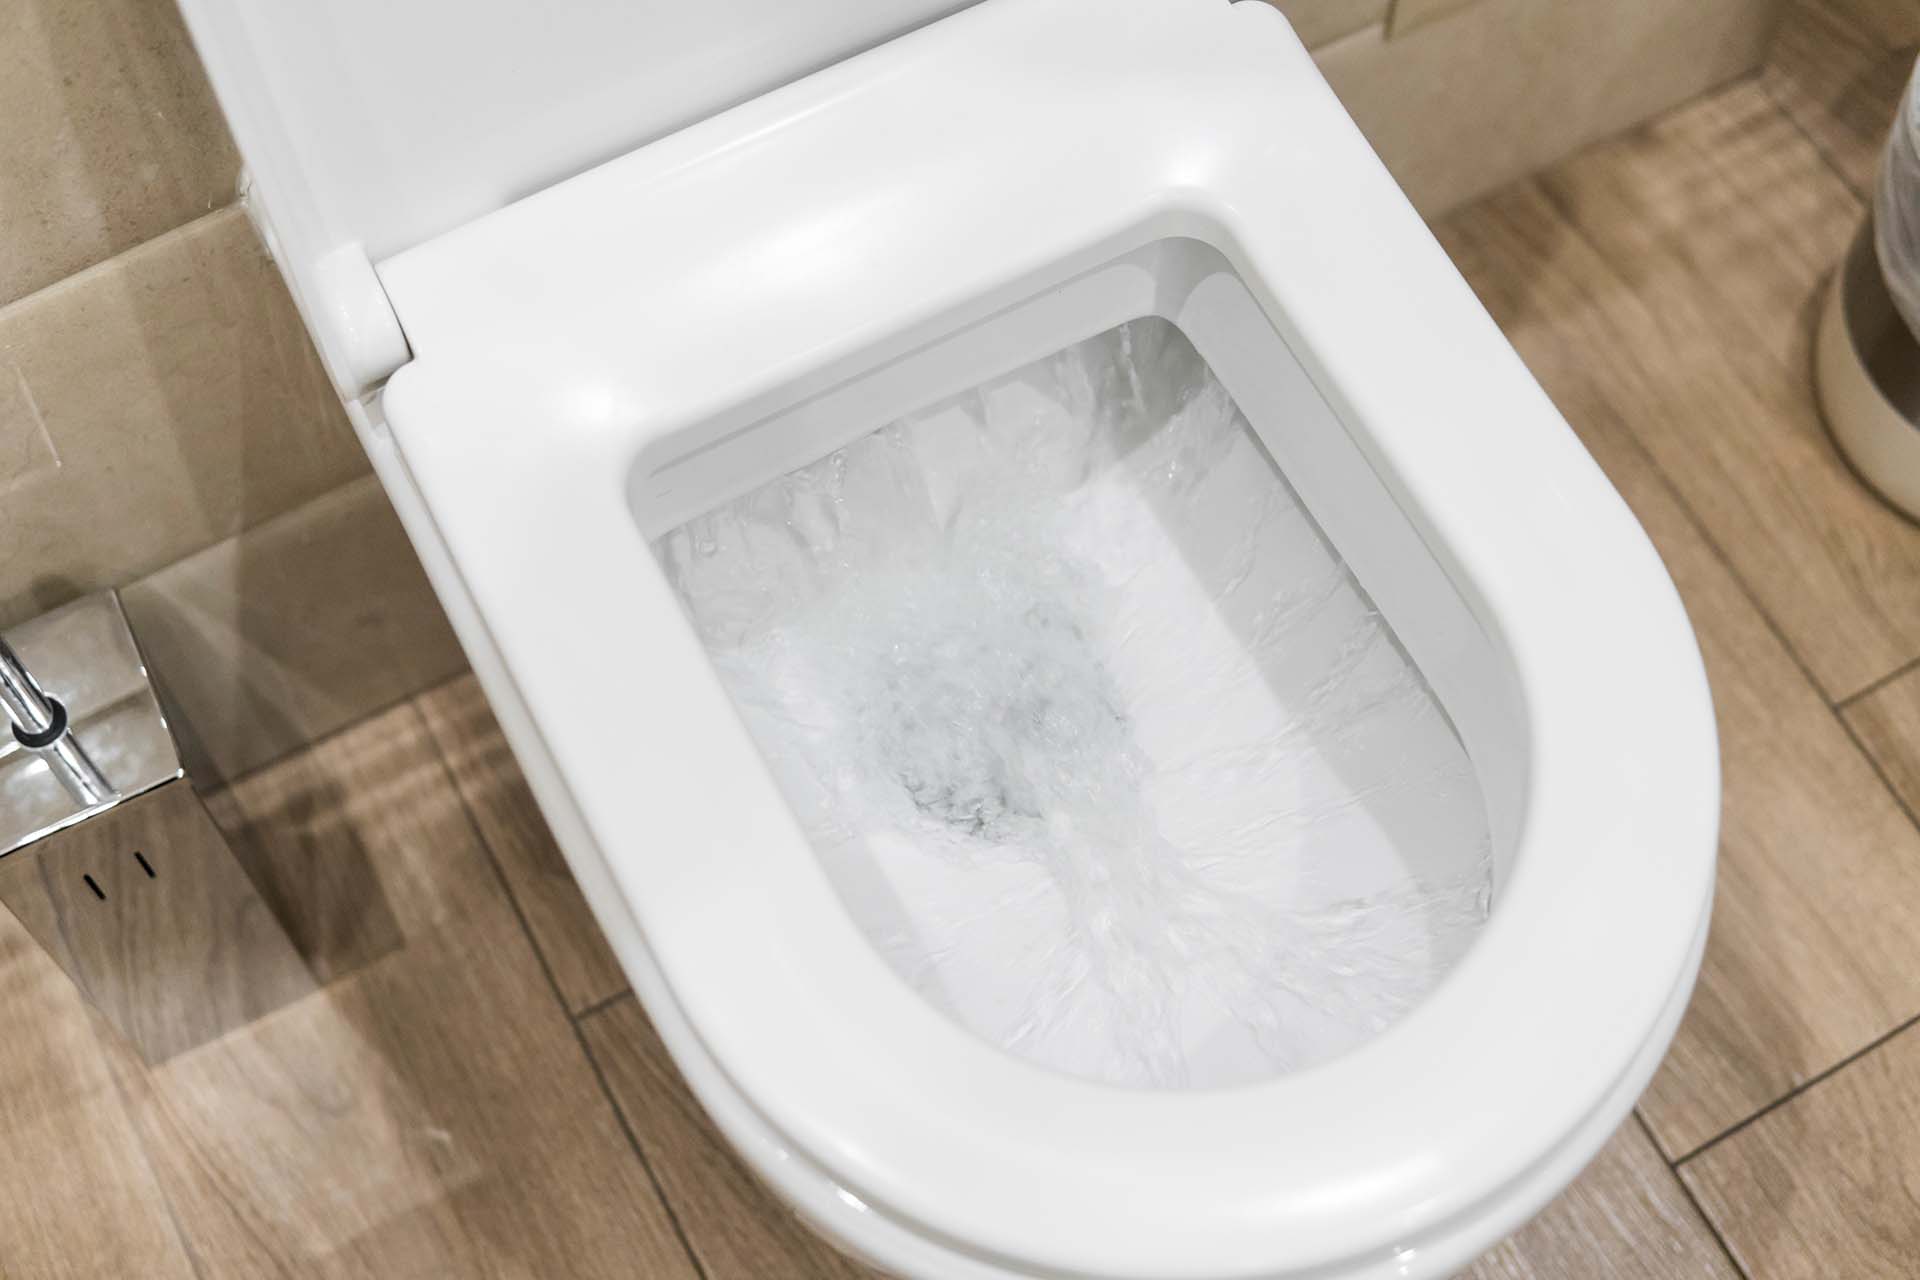 How To Fix A Slow Flushing Toilet